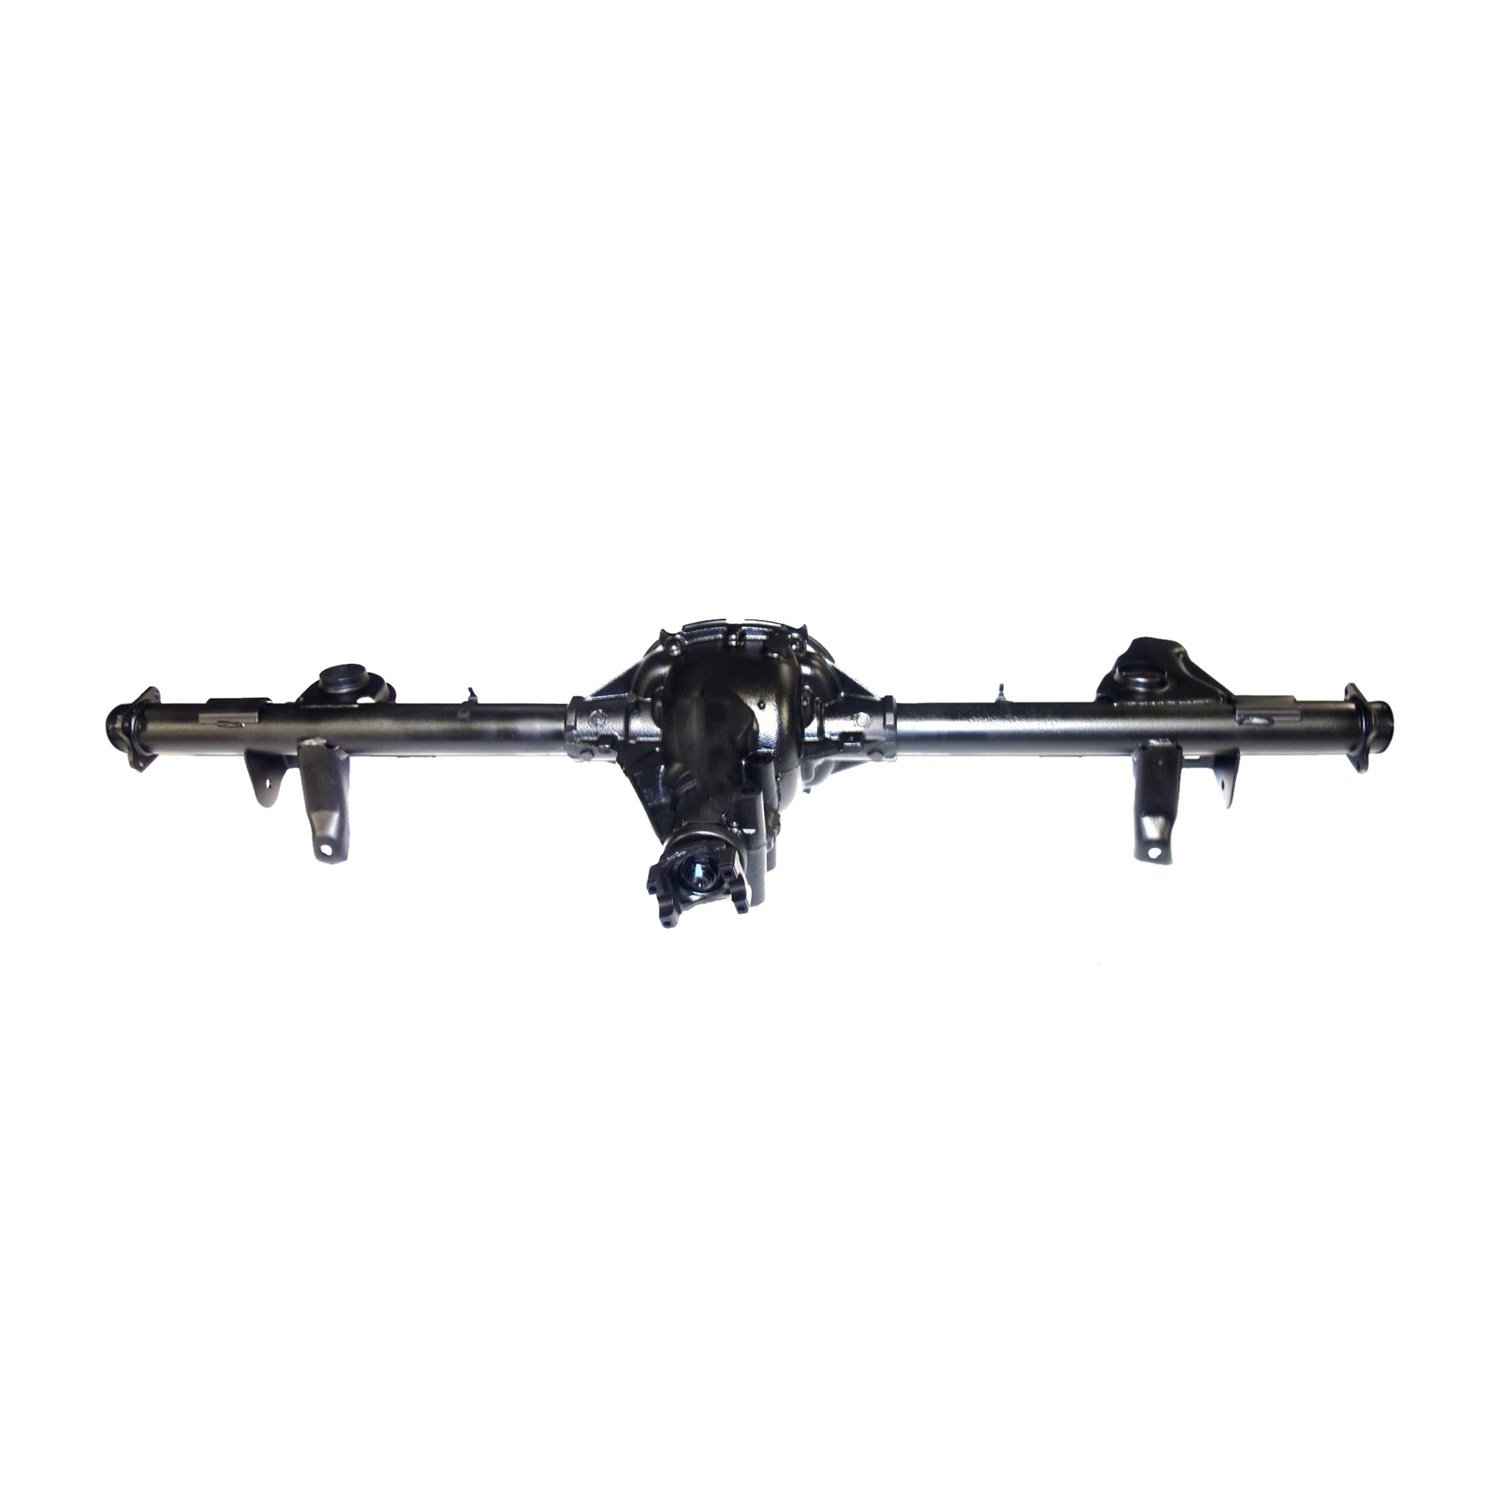 Remanufactured Axle Assy for GM 7.5" 95-97 Chevy S10 Blazer & S15 Jimmy, 3.08 , 4x4